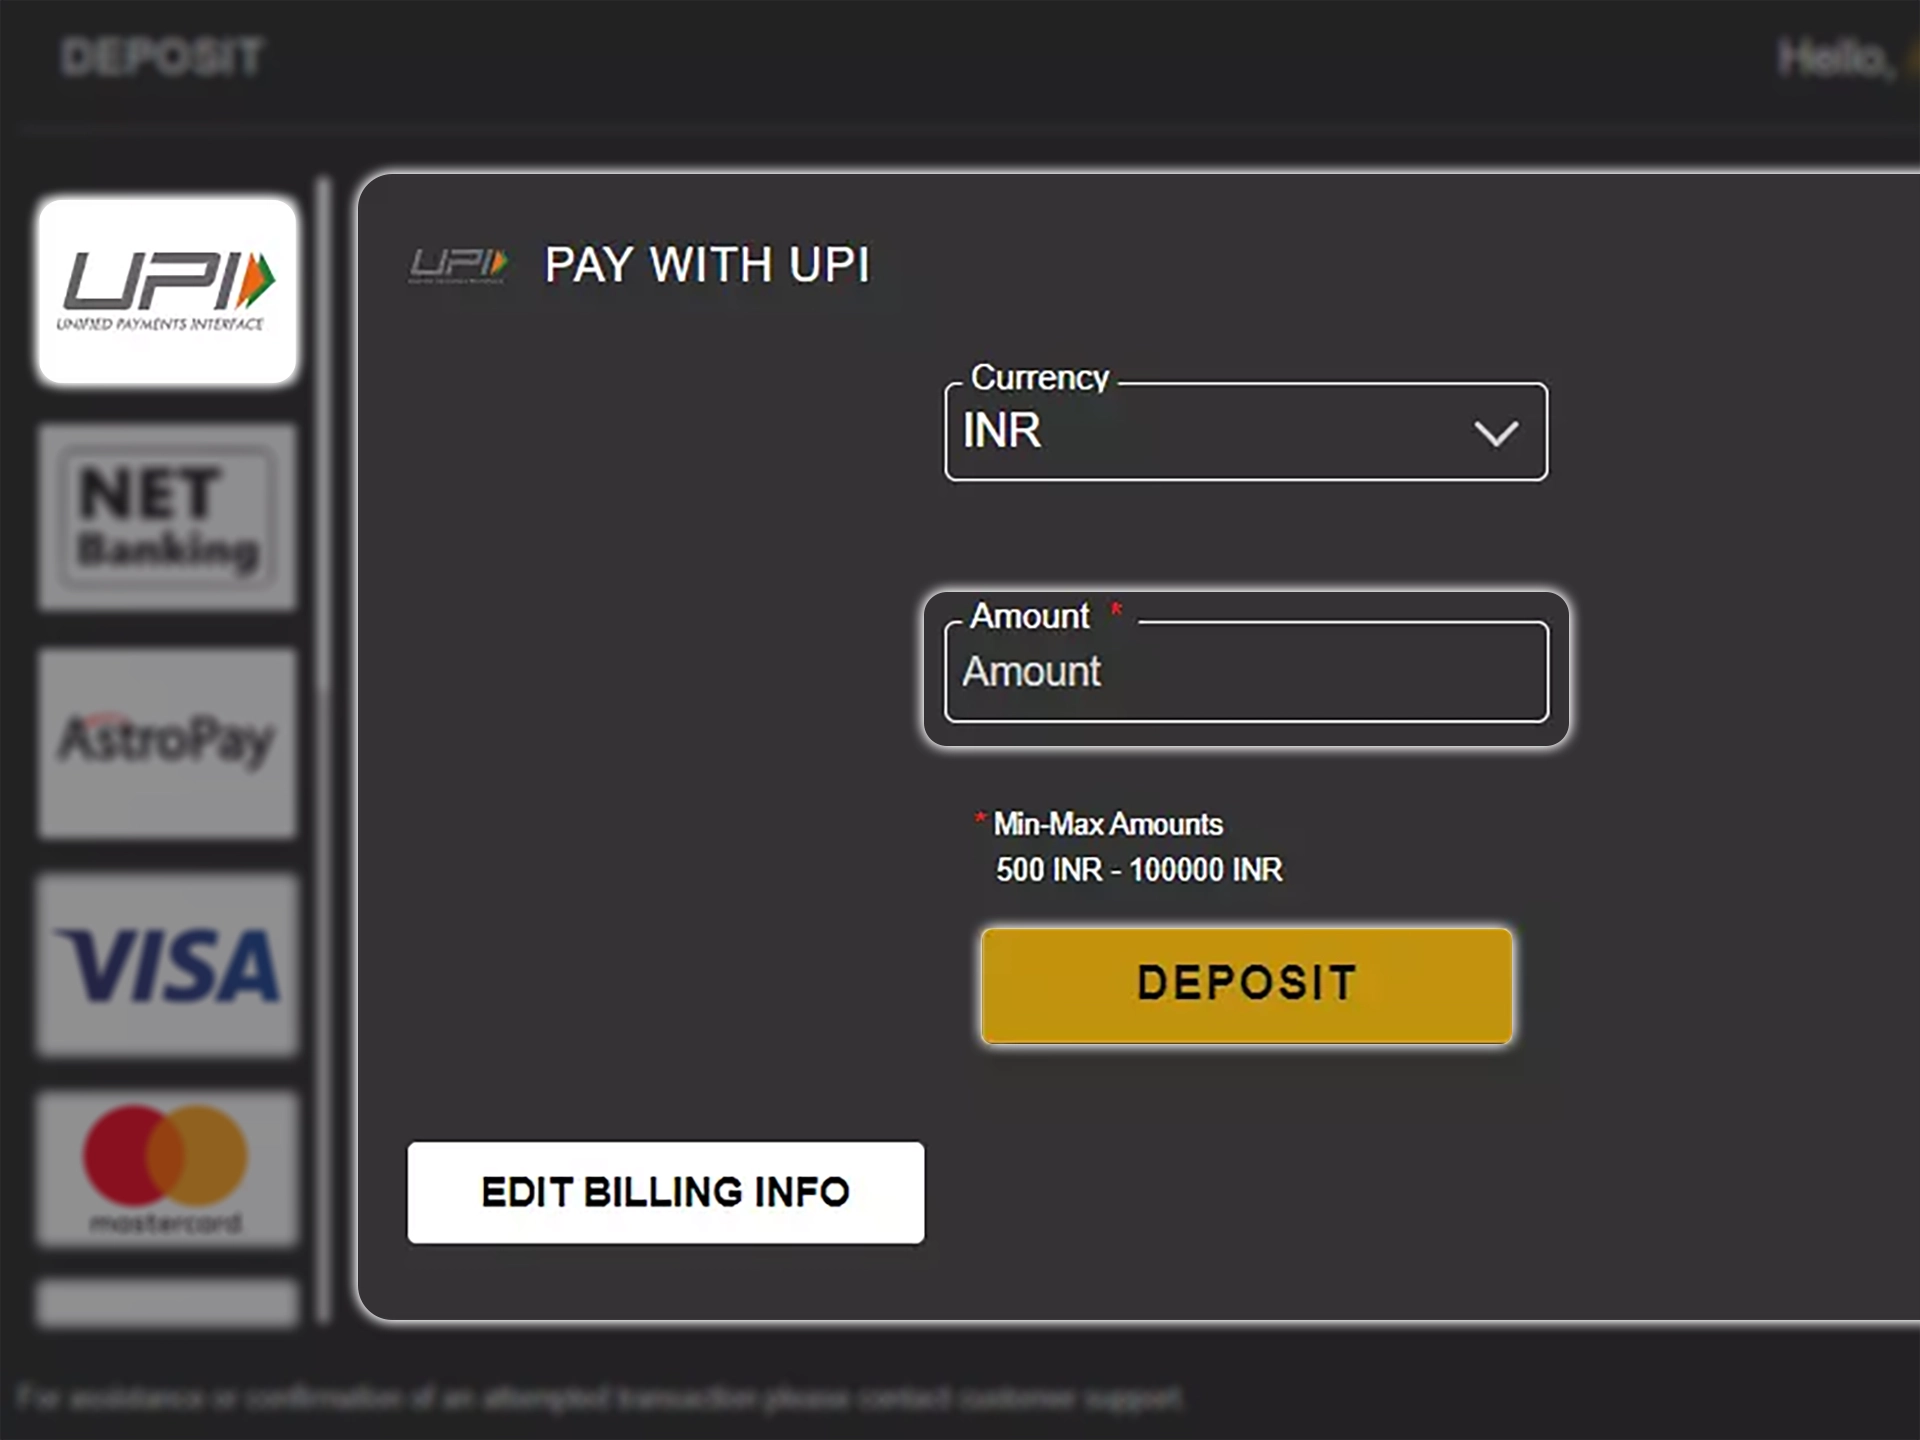 Specify the amount you want to deposit and confirm the transaction at Betindi.